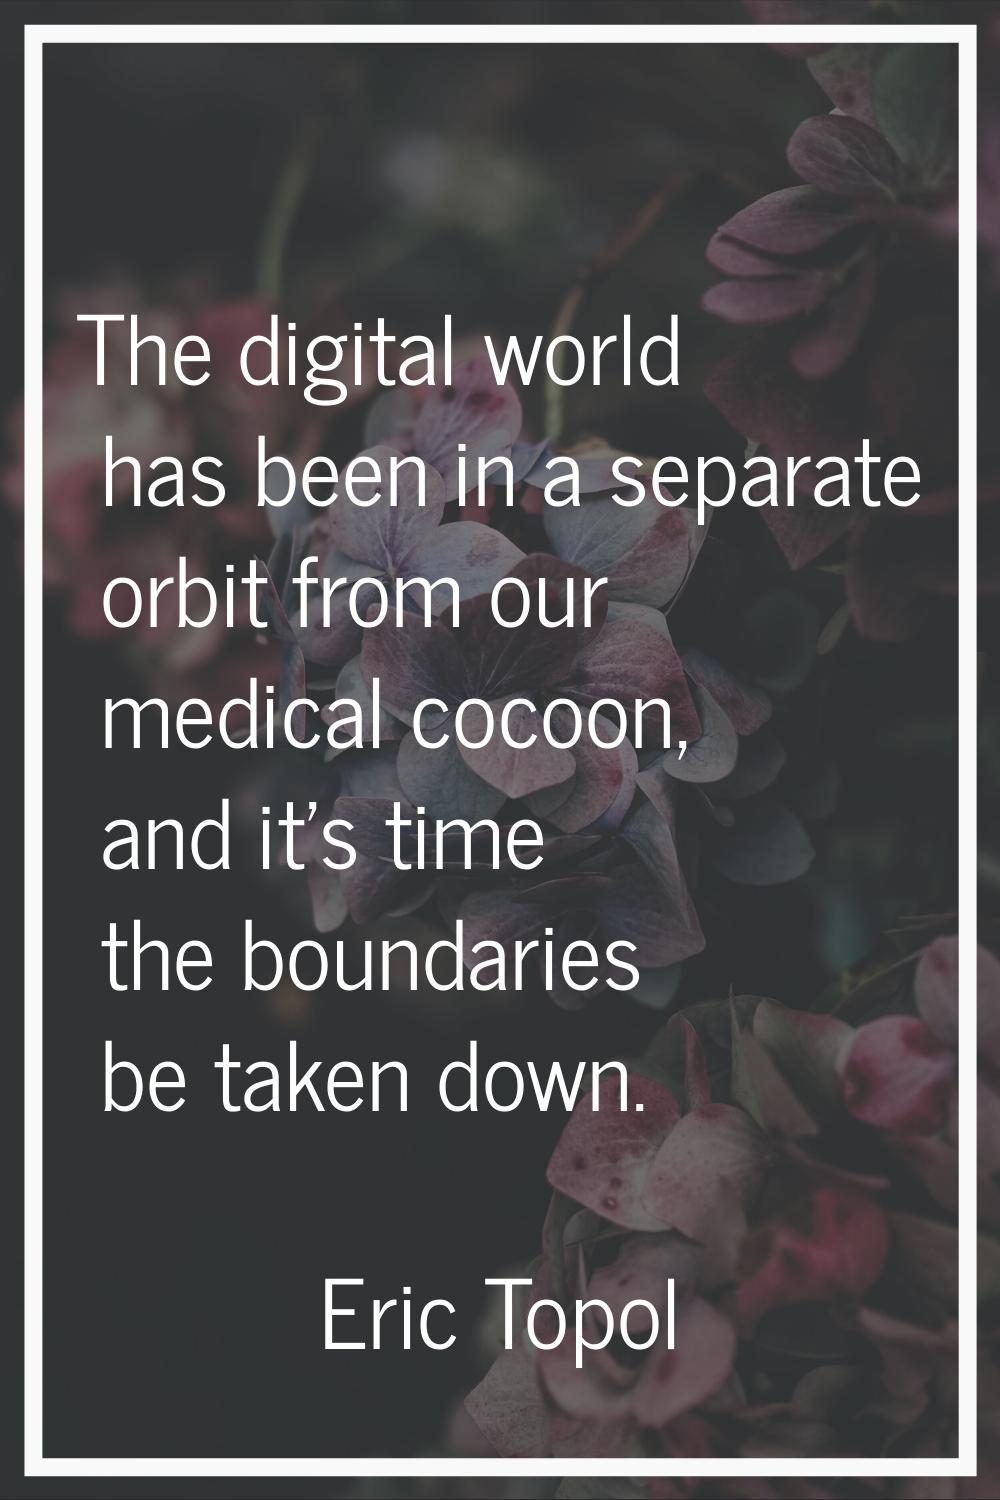 The digital world has been in a separate orbit from our medical cocoon, and it's time the boundarie